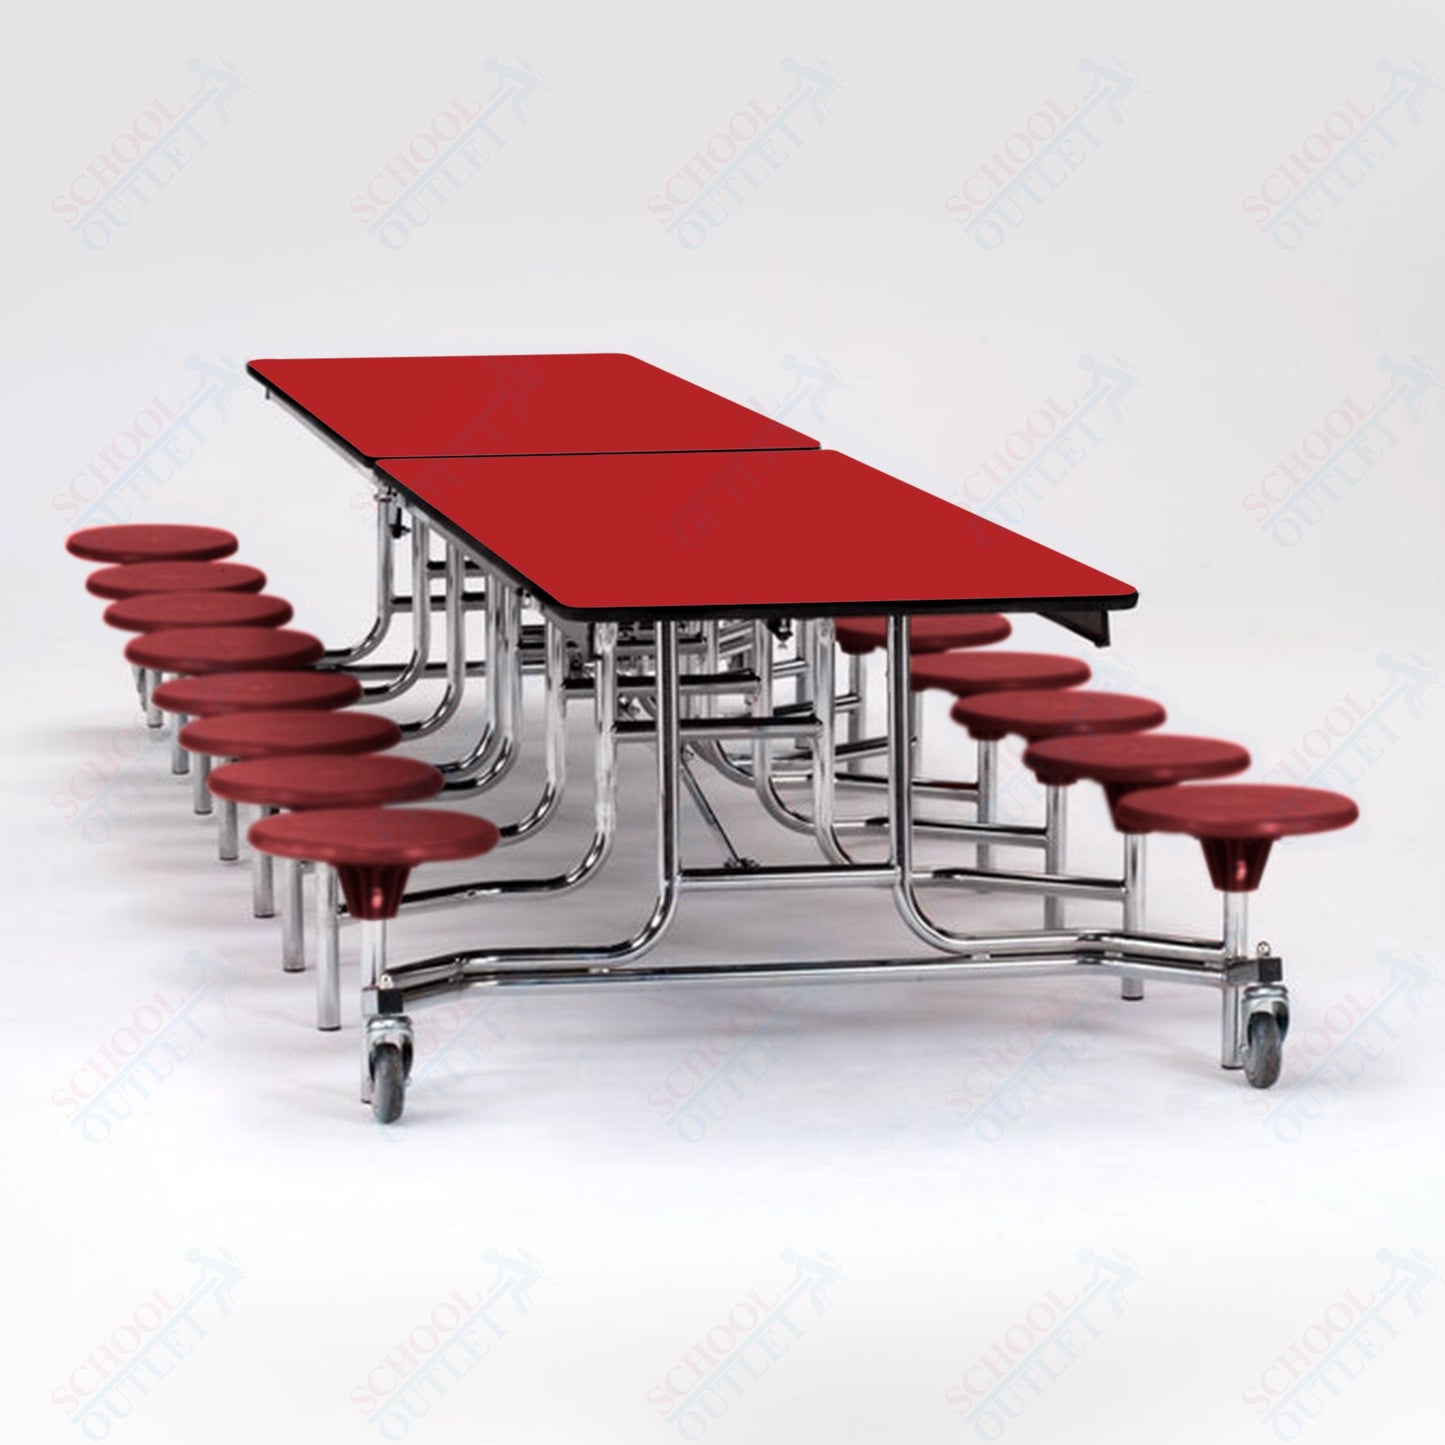 NPS Mobile Cafeteria Table - 30" W x 12' L - 16 Stools - Plywood Core - Protect Edge - Black Powdercoated Frame